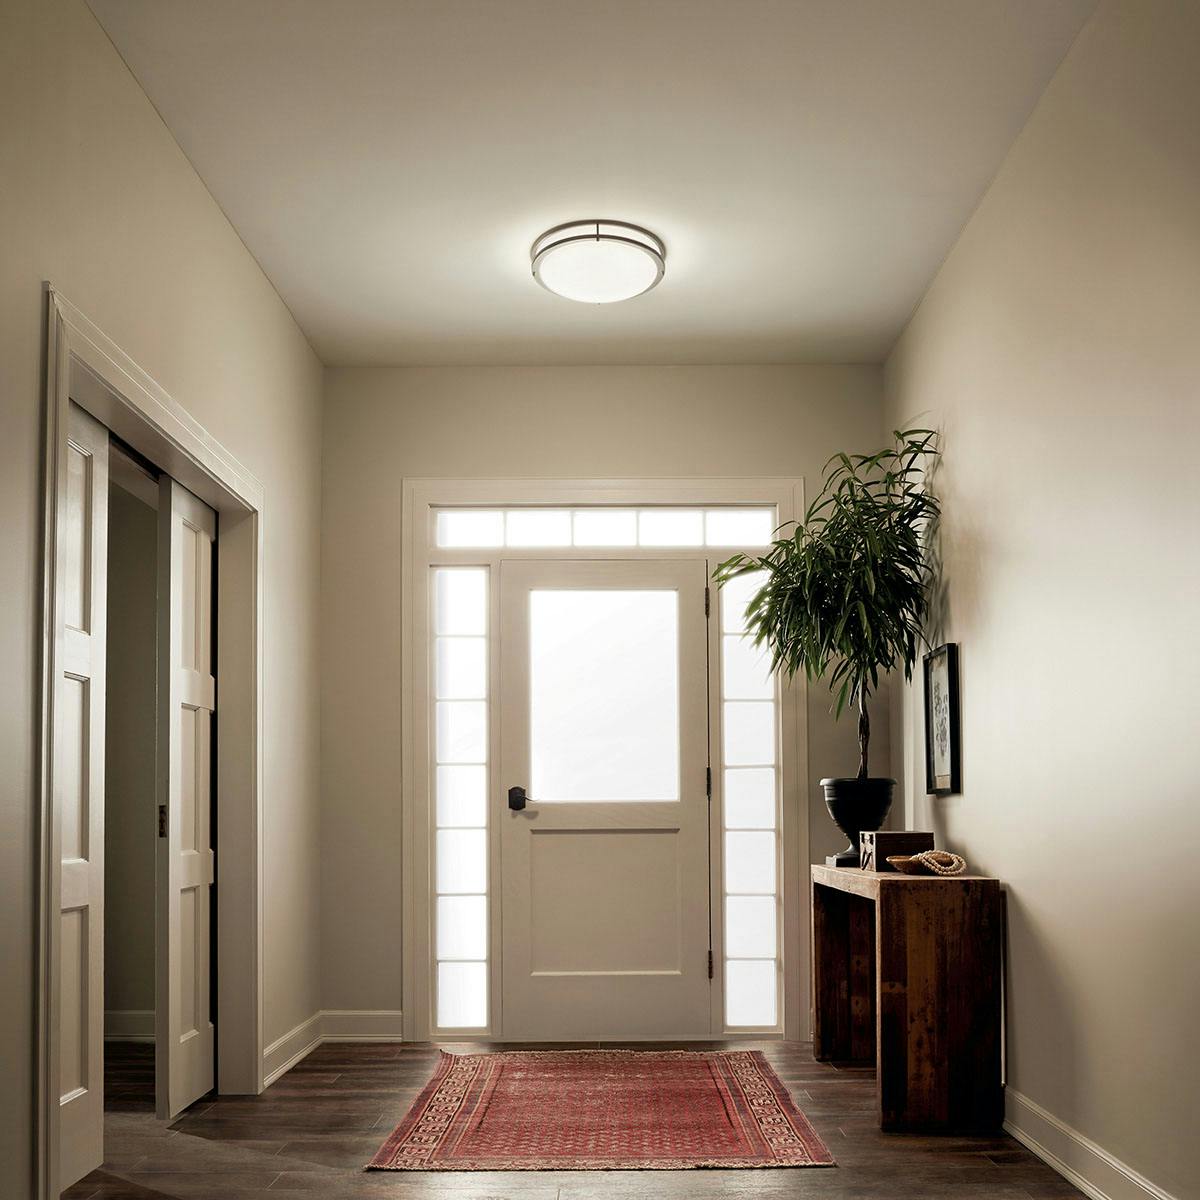 Day time Hallway image featuring Avon flush mount light 10789OZLED